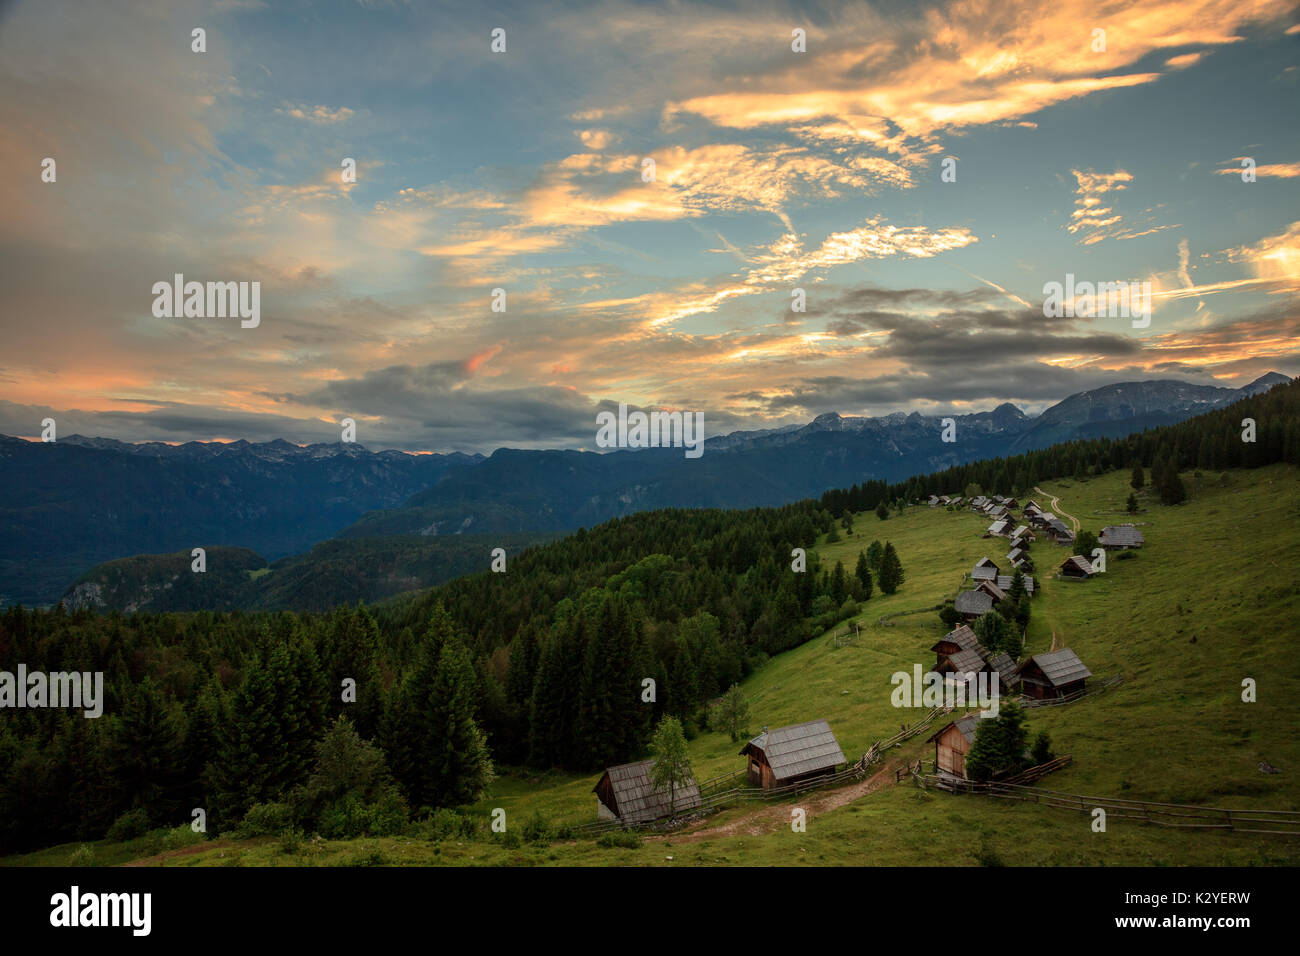 Zajamniki, the pasture village in the mountains of Pokljuka, center of the Julian Alps and Triglav national park is today a holiday village. Stock Photo